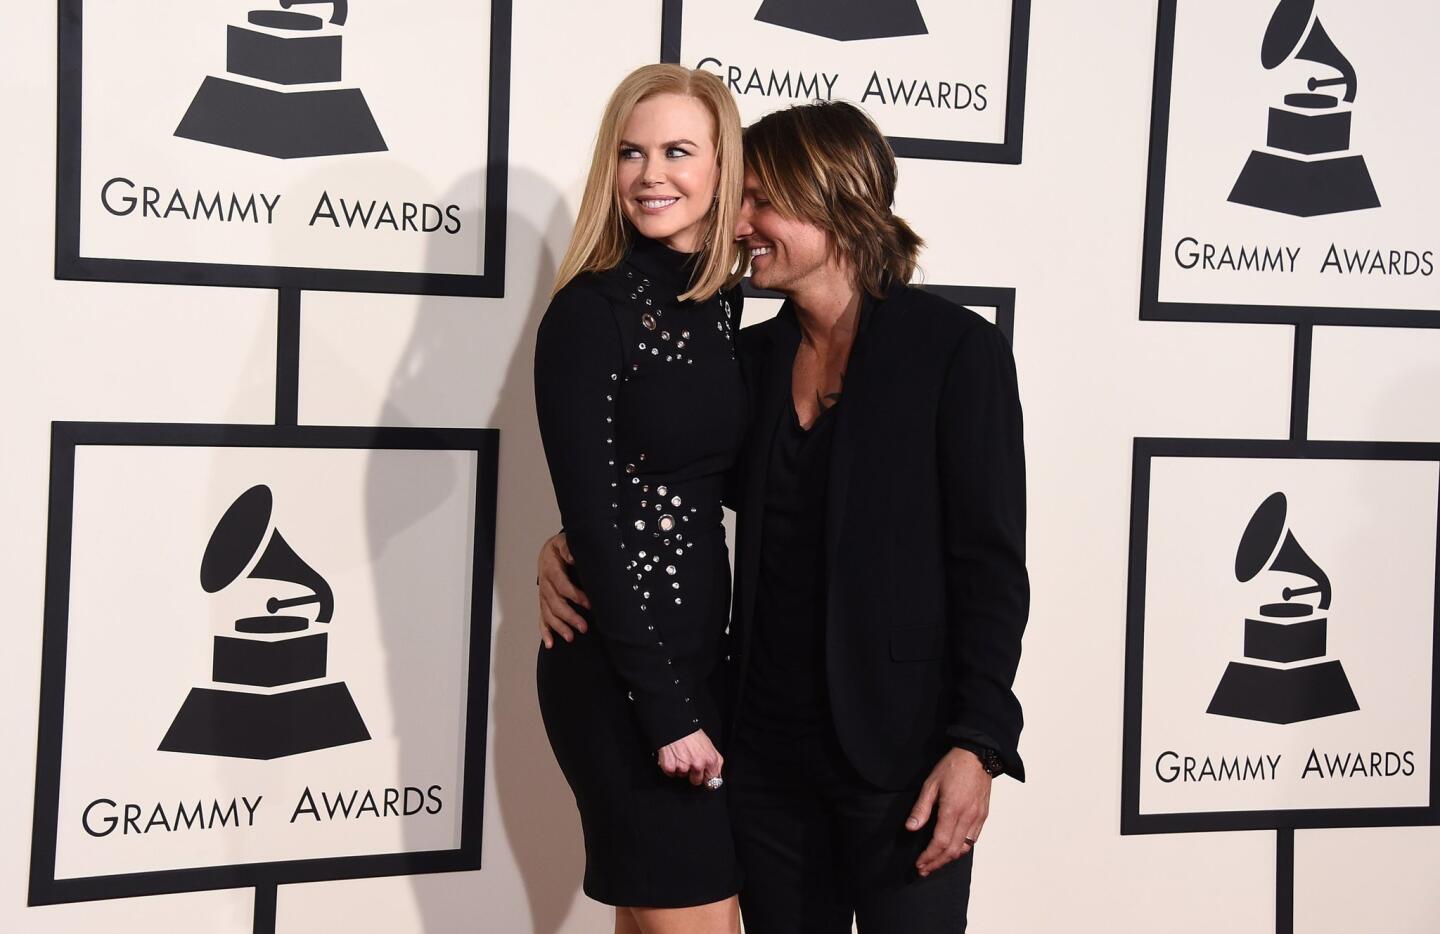 Couples at the 2015 Grammys